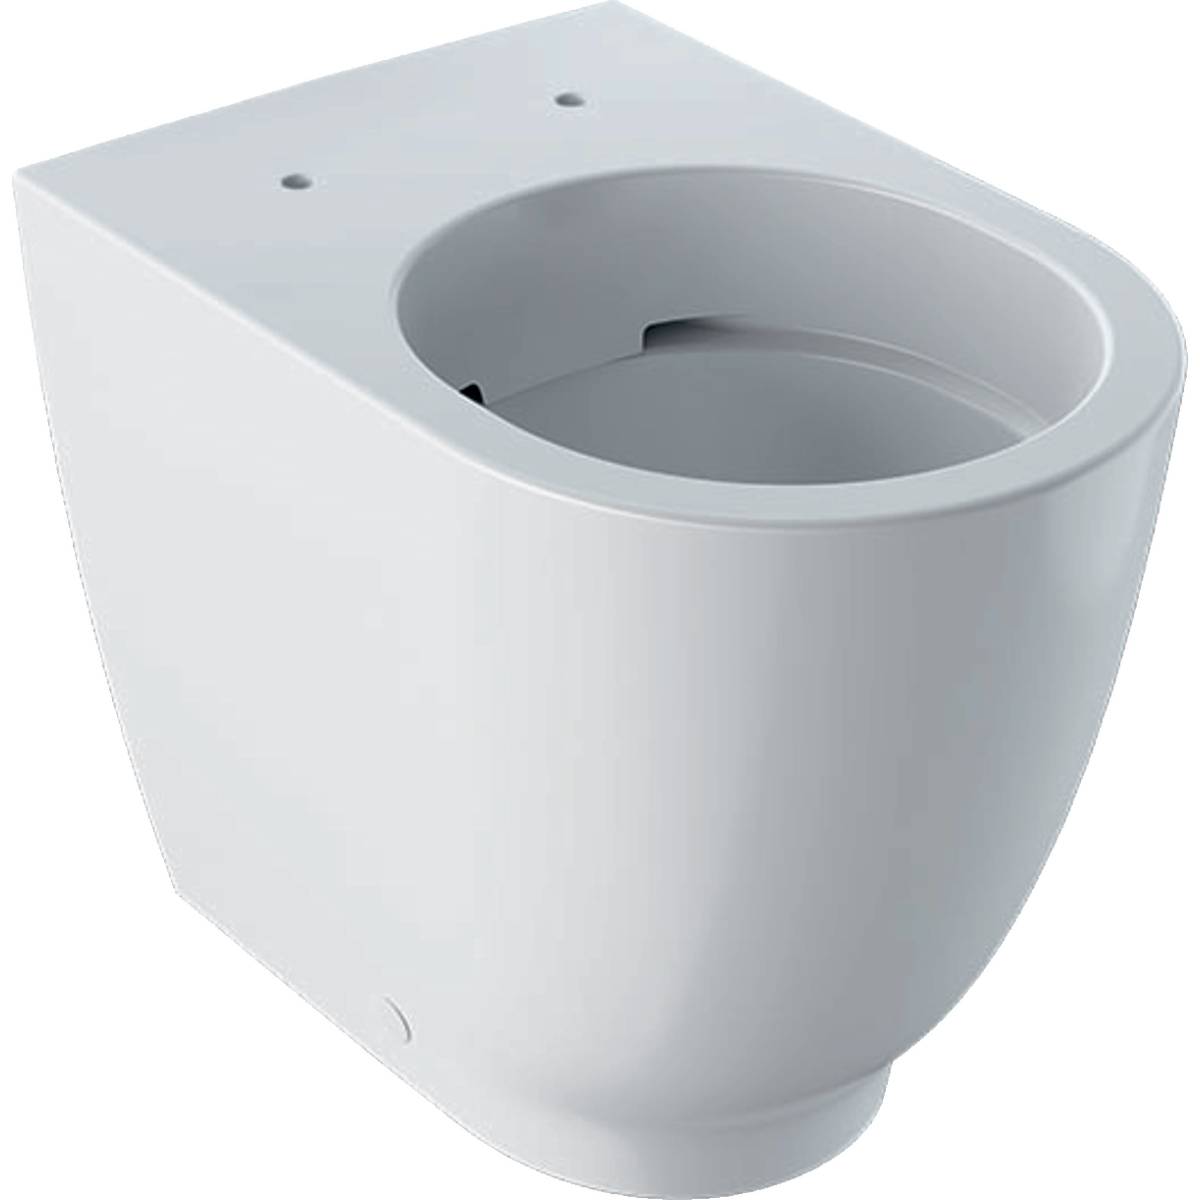 Acanto Floor-Standing WC, Washdown, Raised, Back-To-Wall, Shrouded, Rimfree